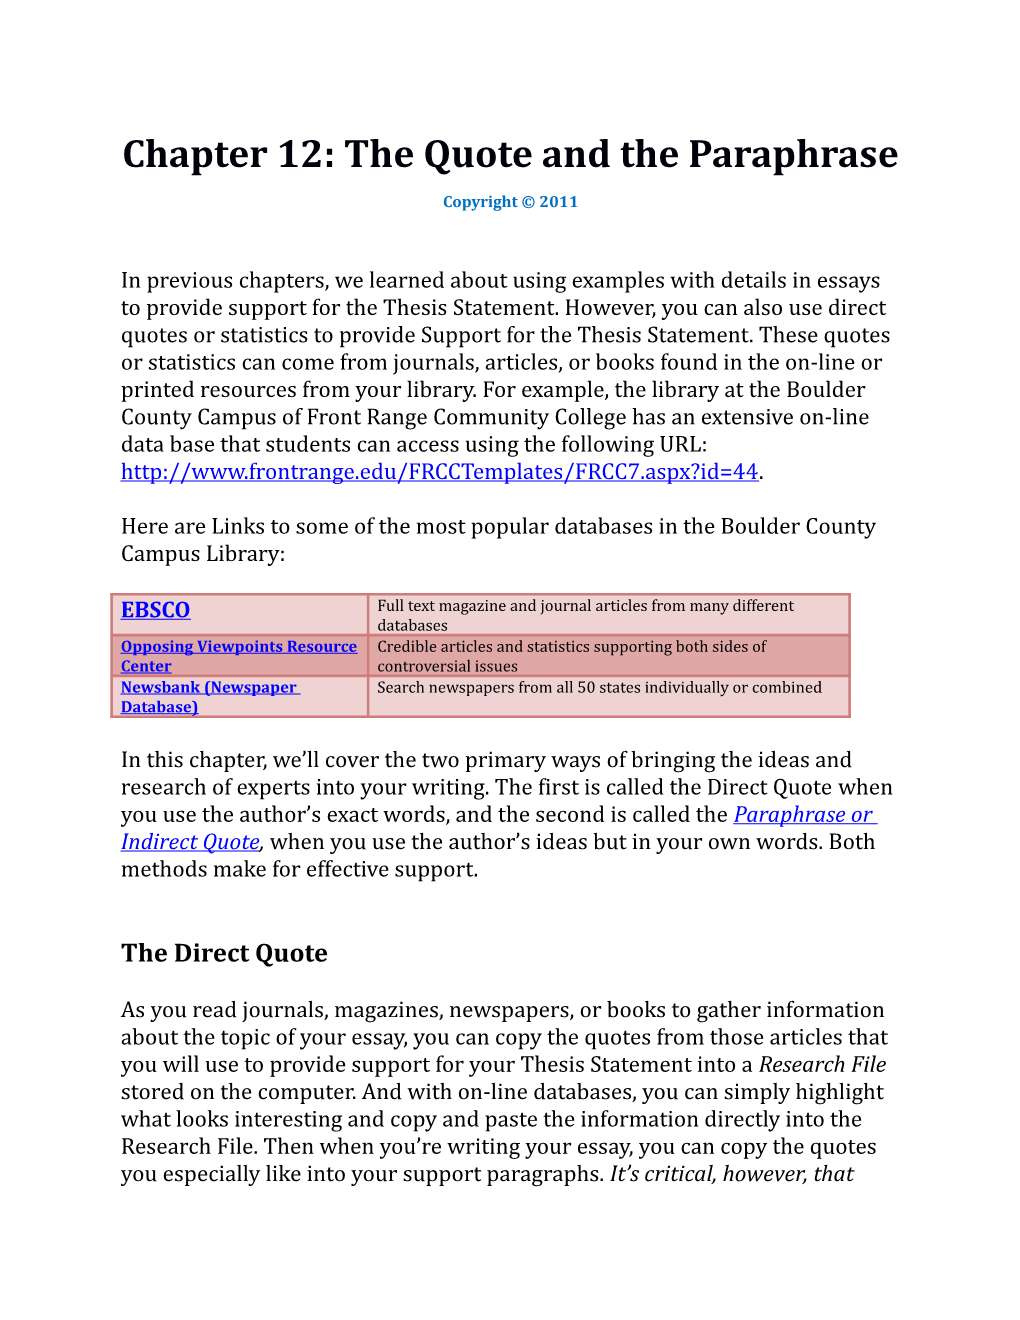 Chapter 12: the Quote and the Paraphrase